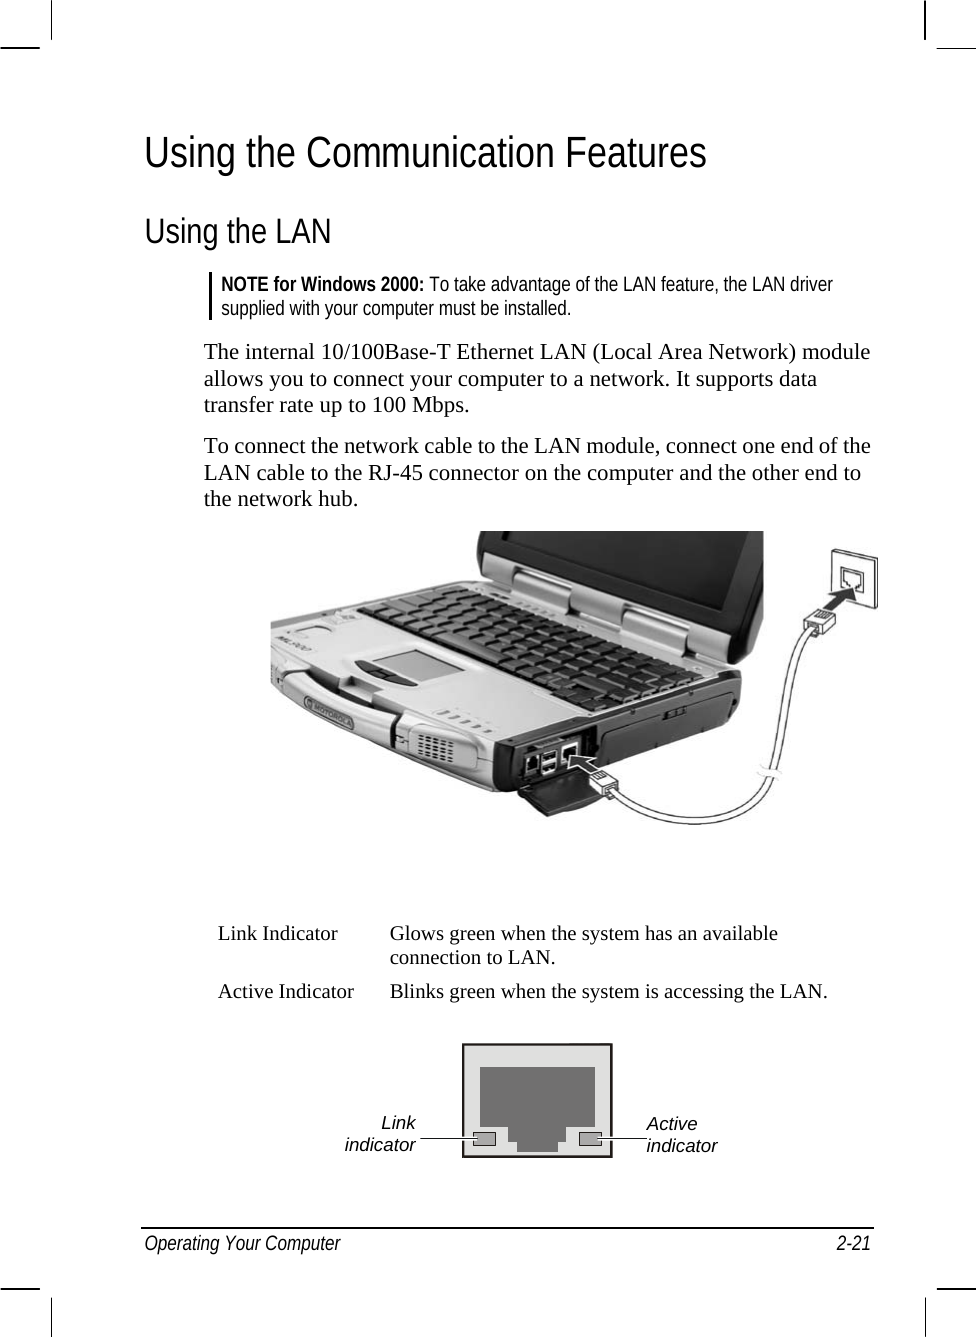  Using the Communication Features Using the LAN NOTE for Windows 2000: To take advantage of the LAN feature, the LAN driver supplied with your computer must be installed.  The internal 10/100Base-T Ethernet LAN (Local Area Network) module allows you to connect your computer to a network. It supports data transfer rate up to 100 Mbps. To connect the network cable to the LAN module, connect one end of the LAN cable to the RJ-45 connector on the computer and the other end to the network hub.          Link Indicator  Glows green when the system has an available connection to LAN. Active Indicator  Blinks green when the system is accessing the LAN.  Active indicator Link indicatorOperating Your Computer  2-21 